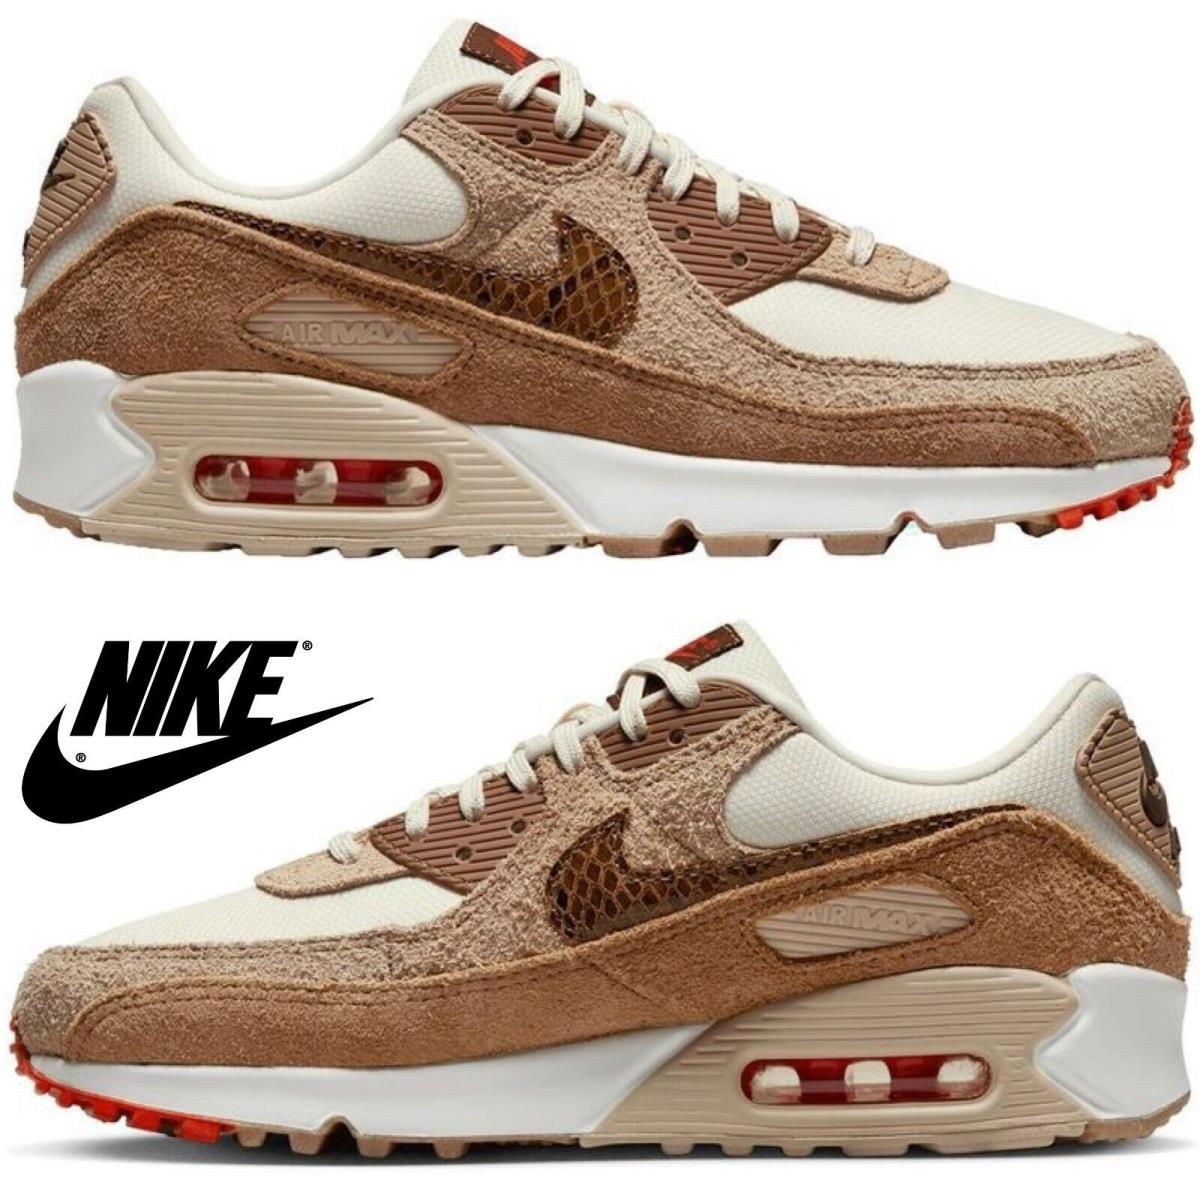 Nike shoes Air Max - Brown , White/red Manufacturer 11